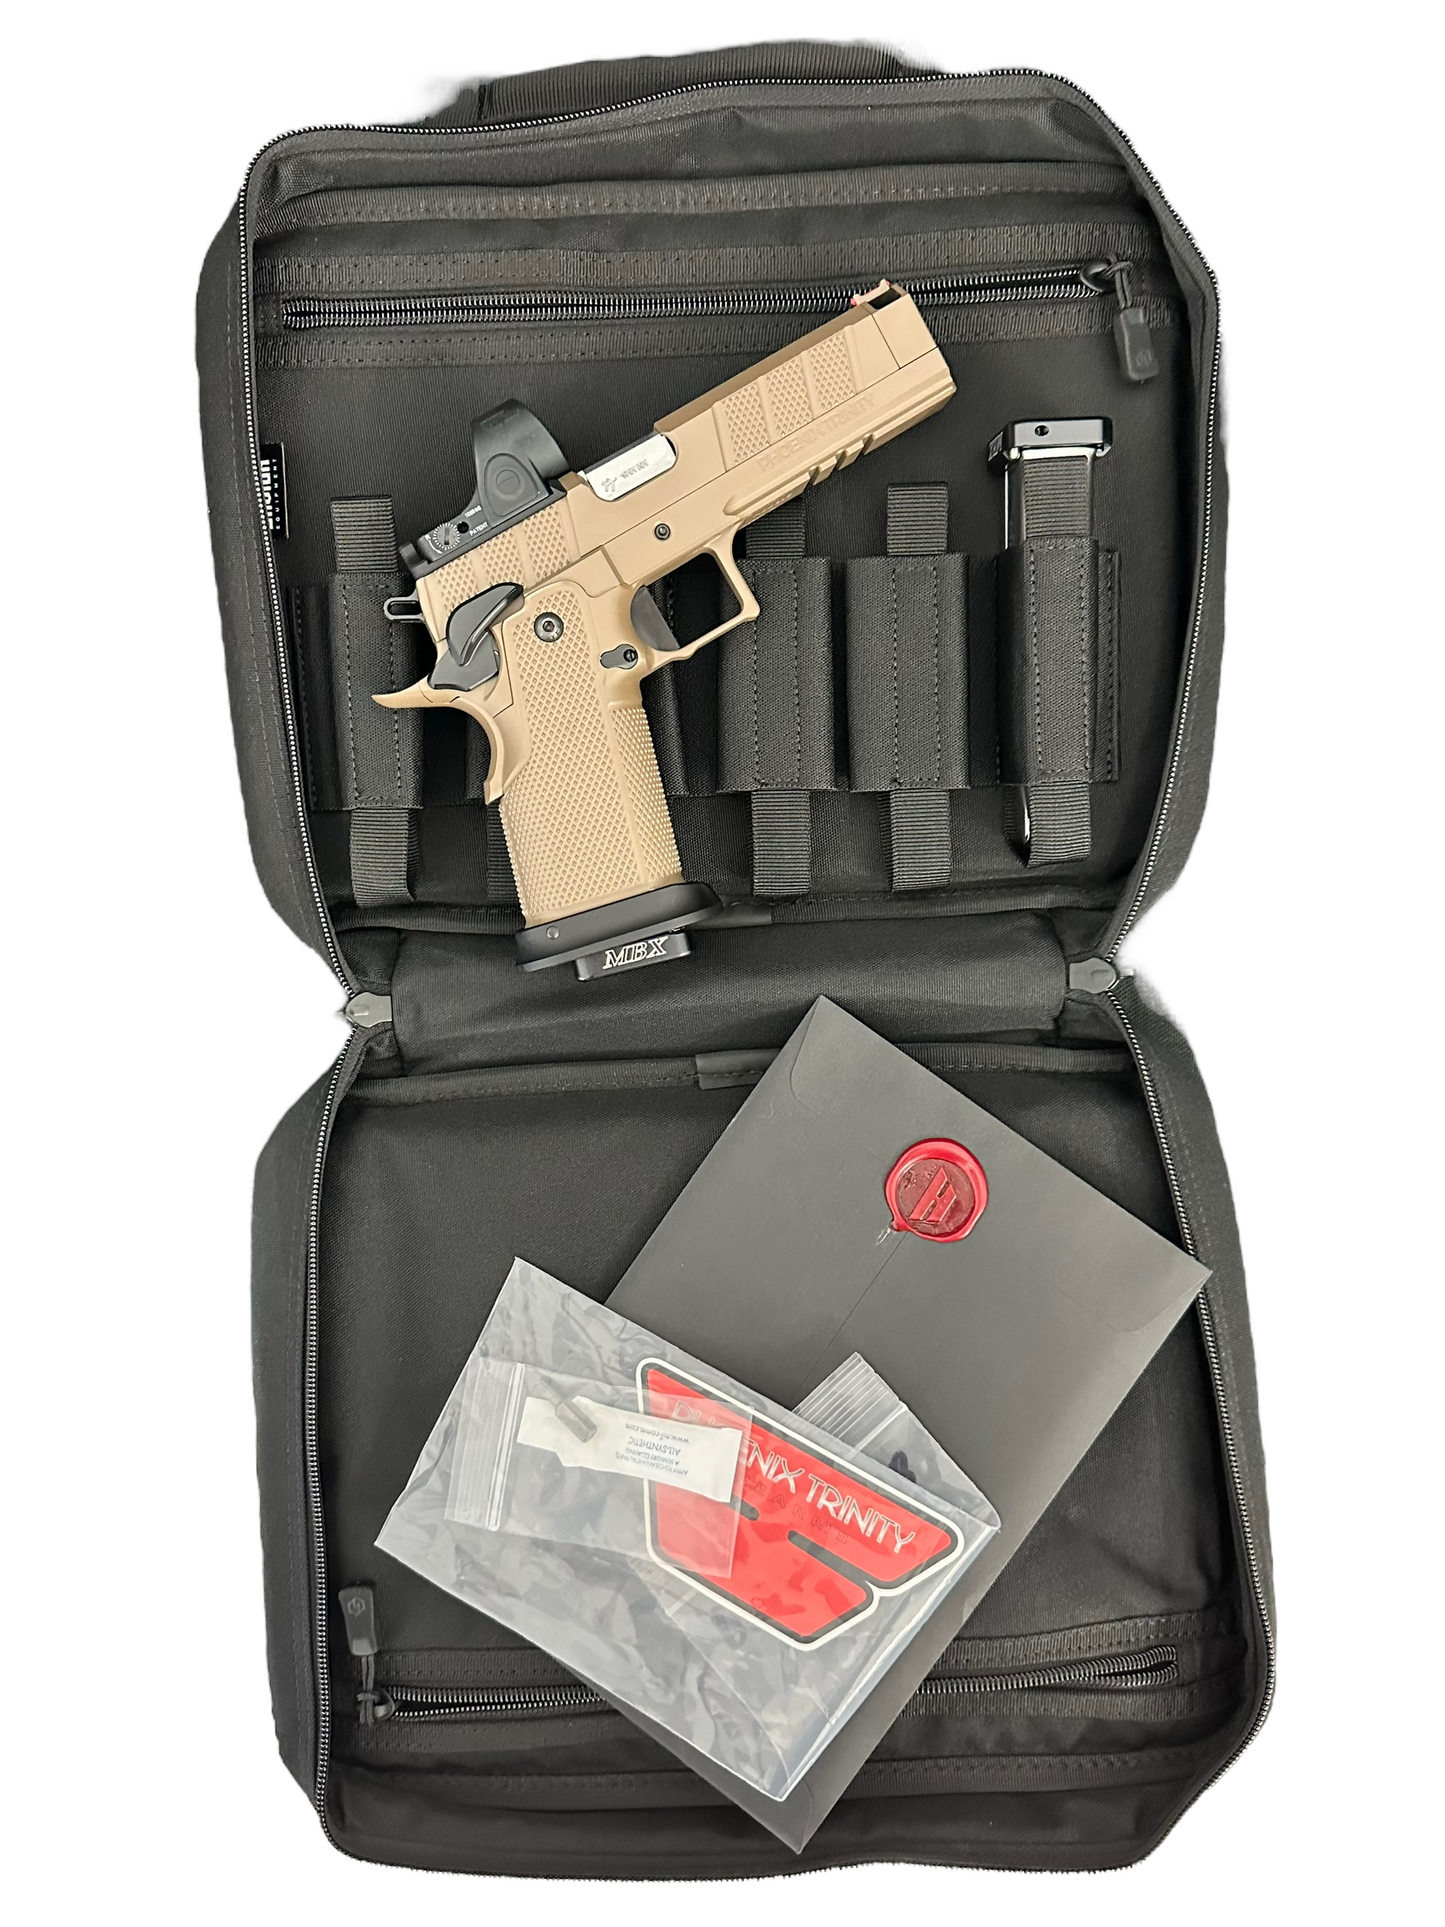 PHOENIX TRINITY H PRO FDE WITH BLACK CONTROLS 9MM COMP’D WITH TRIJICON SRO AND UPGRADES